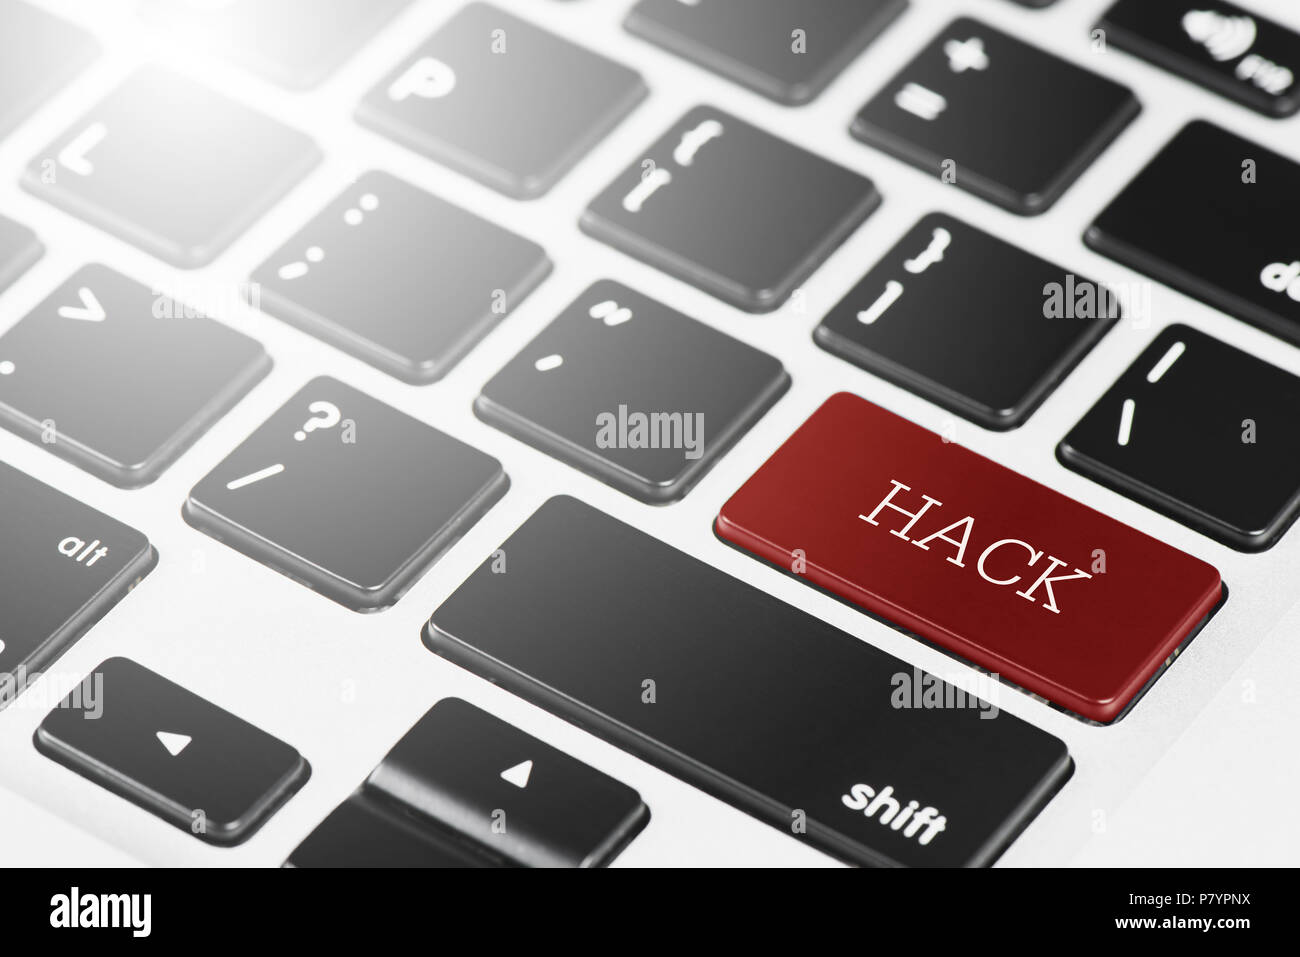 'HACK' Red button keyboard on laptop computer for Business and Technology concept Stock Photo